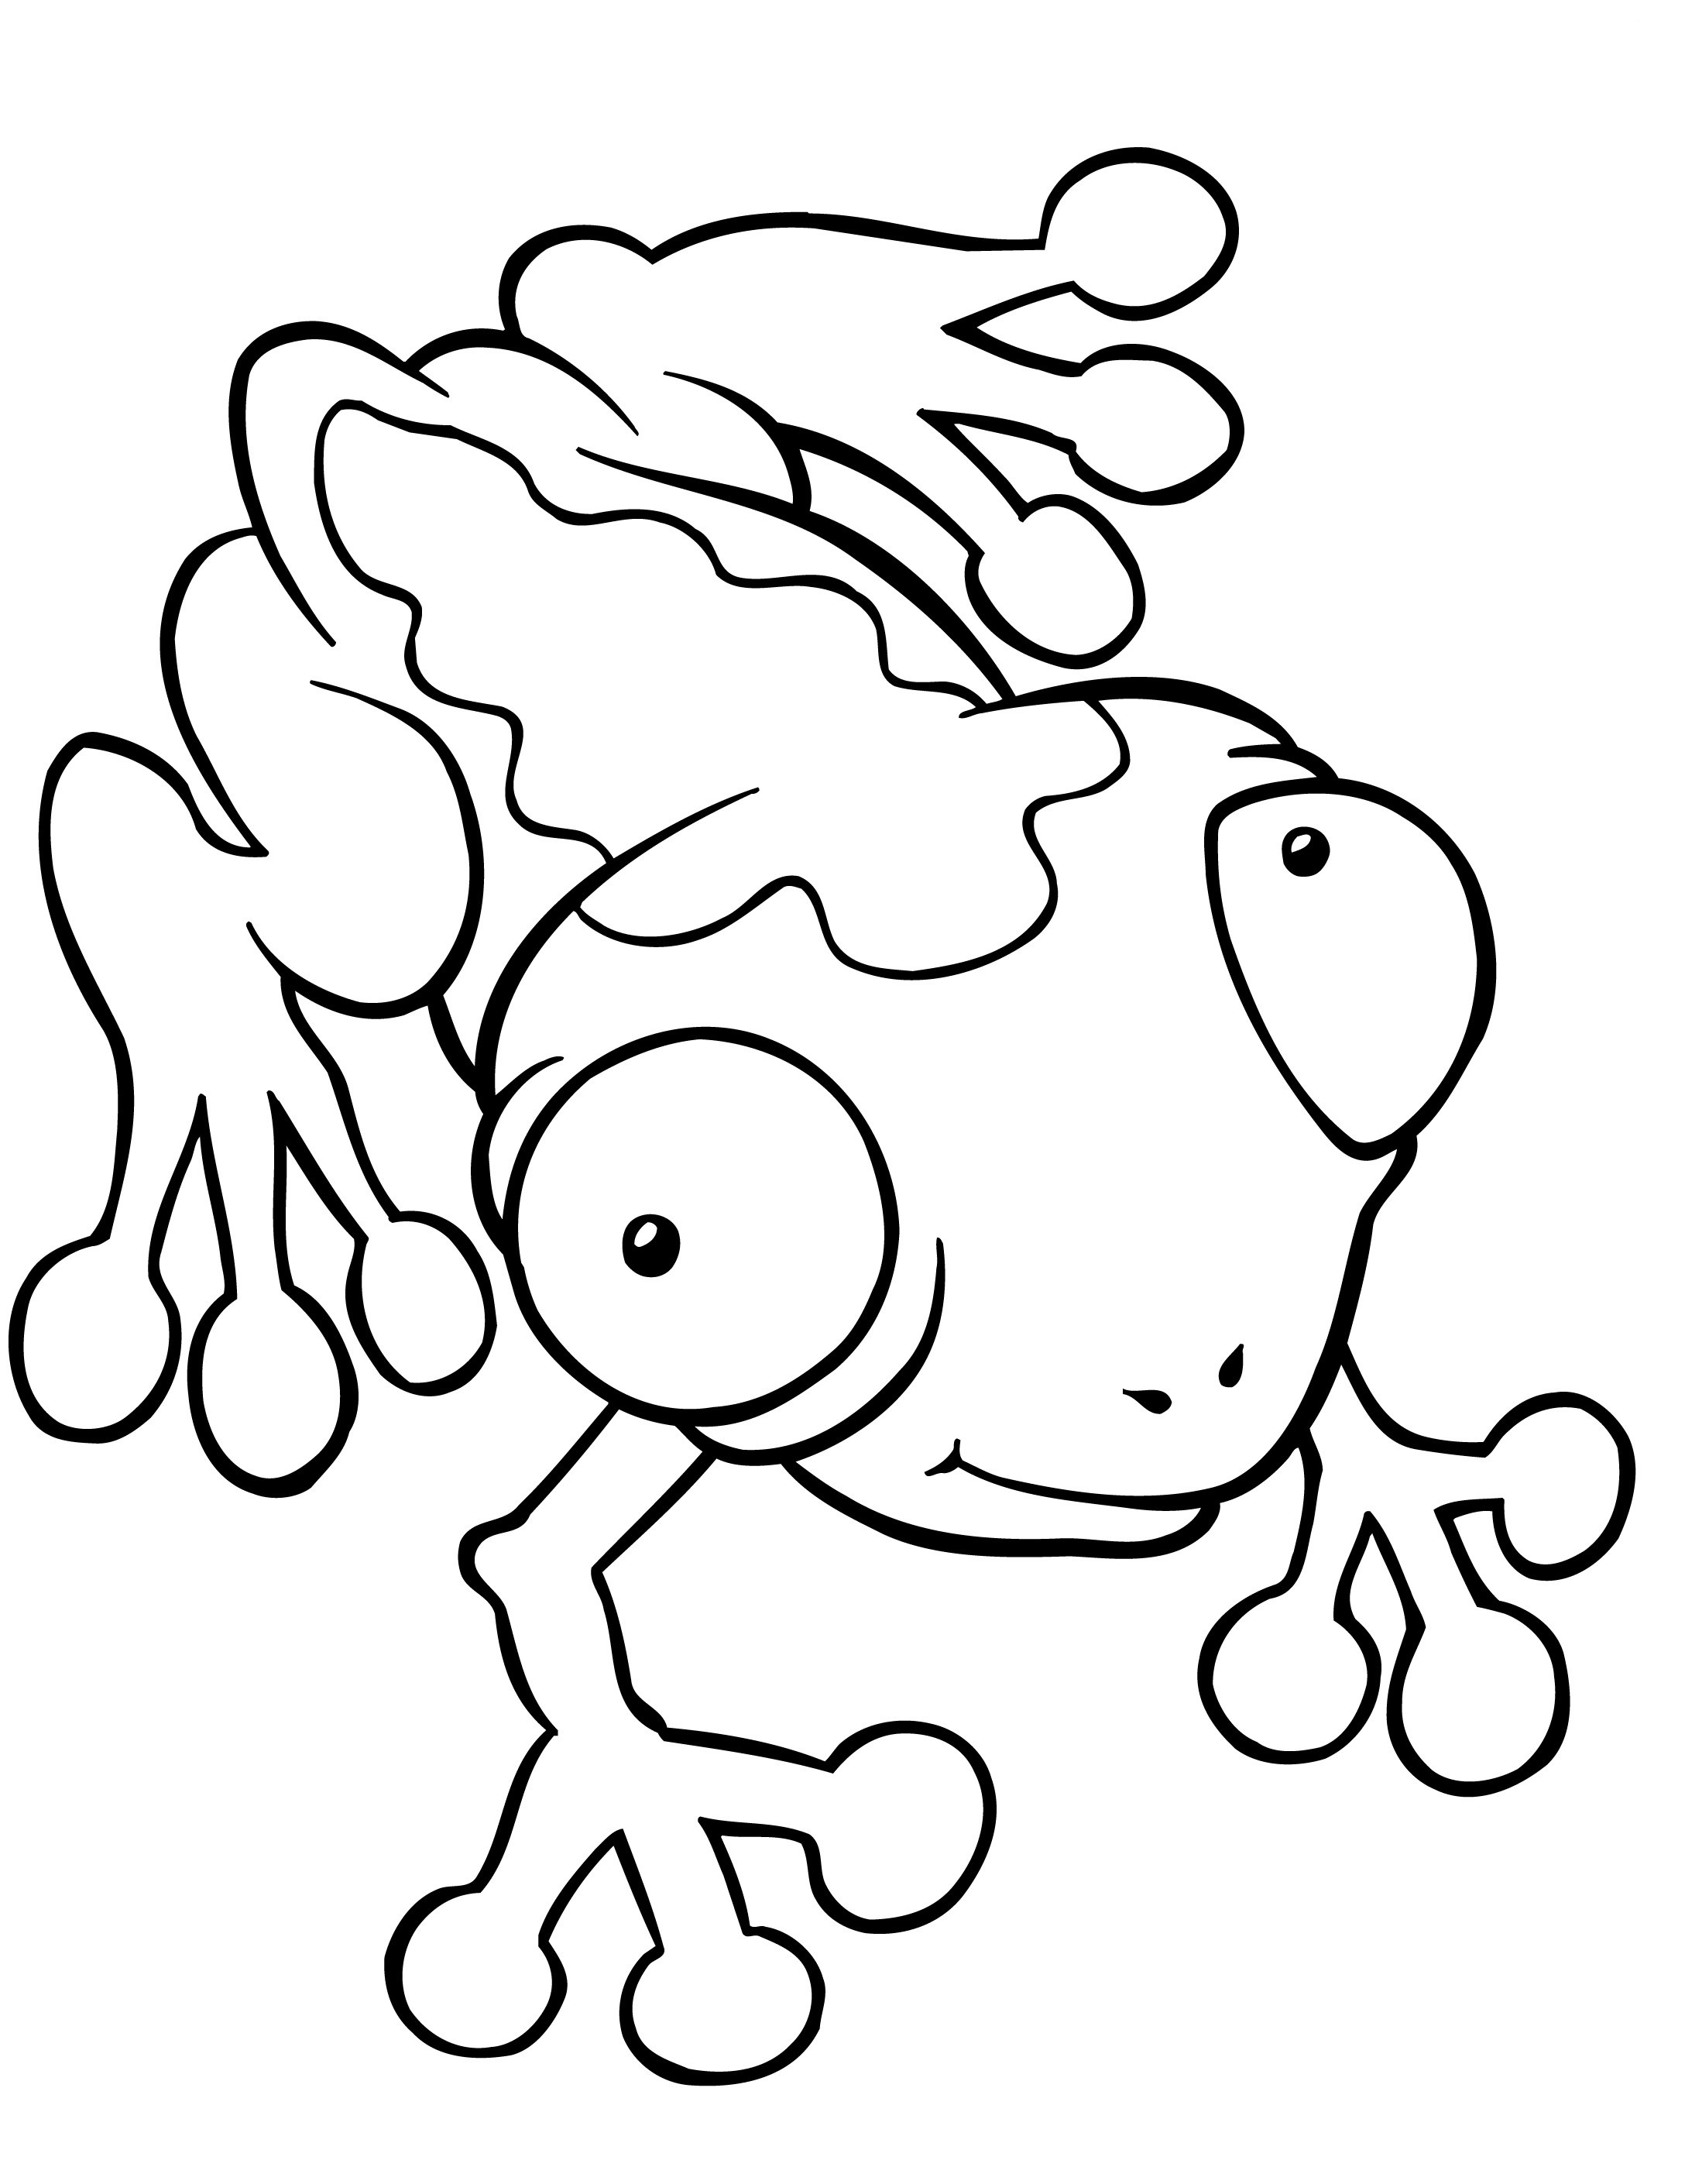 Rainforest Frog Coloring Page Free Printable Frog Coloring Pages For Kids